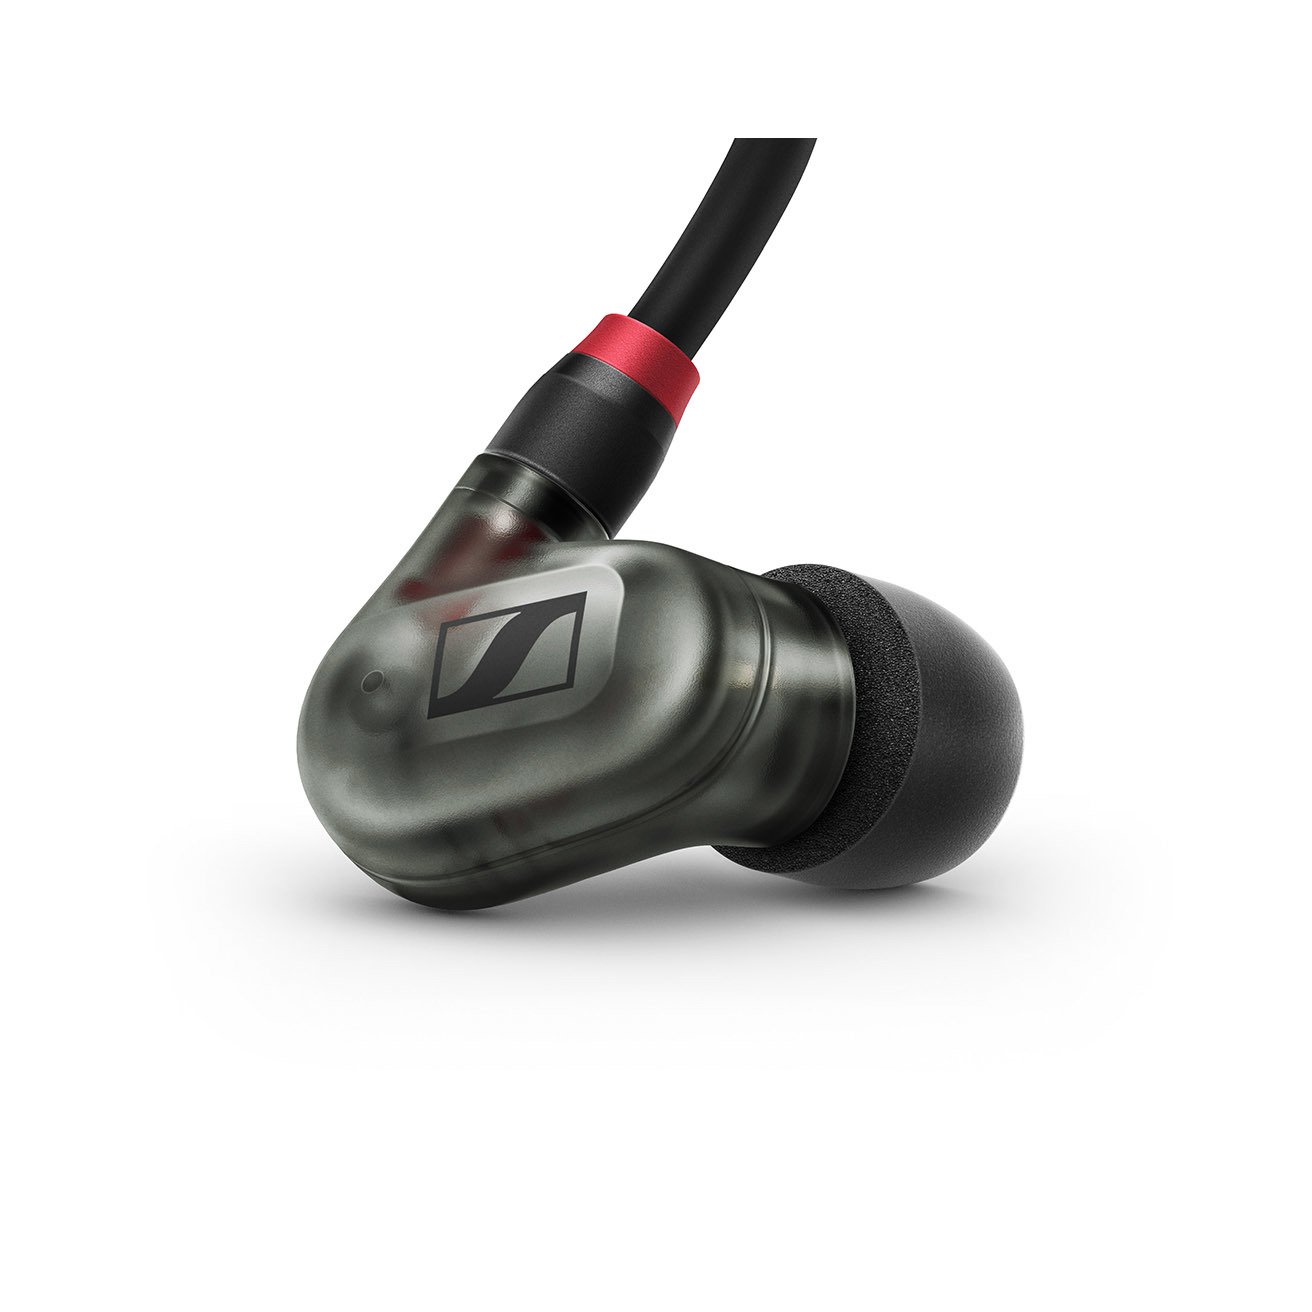 Sennheiser Ie 400 Pro Smoky Black - Ecouteur Intra-auriculaire - Variation 1